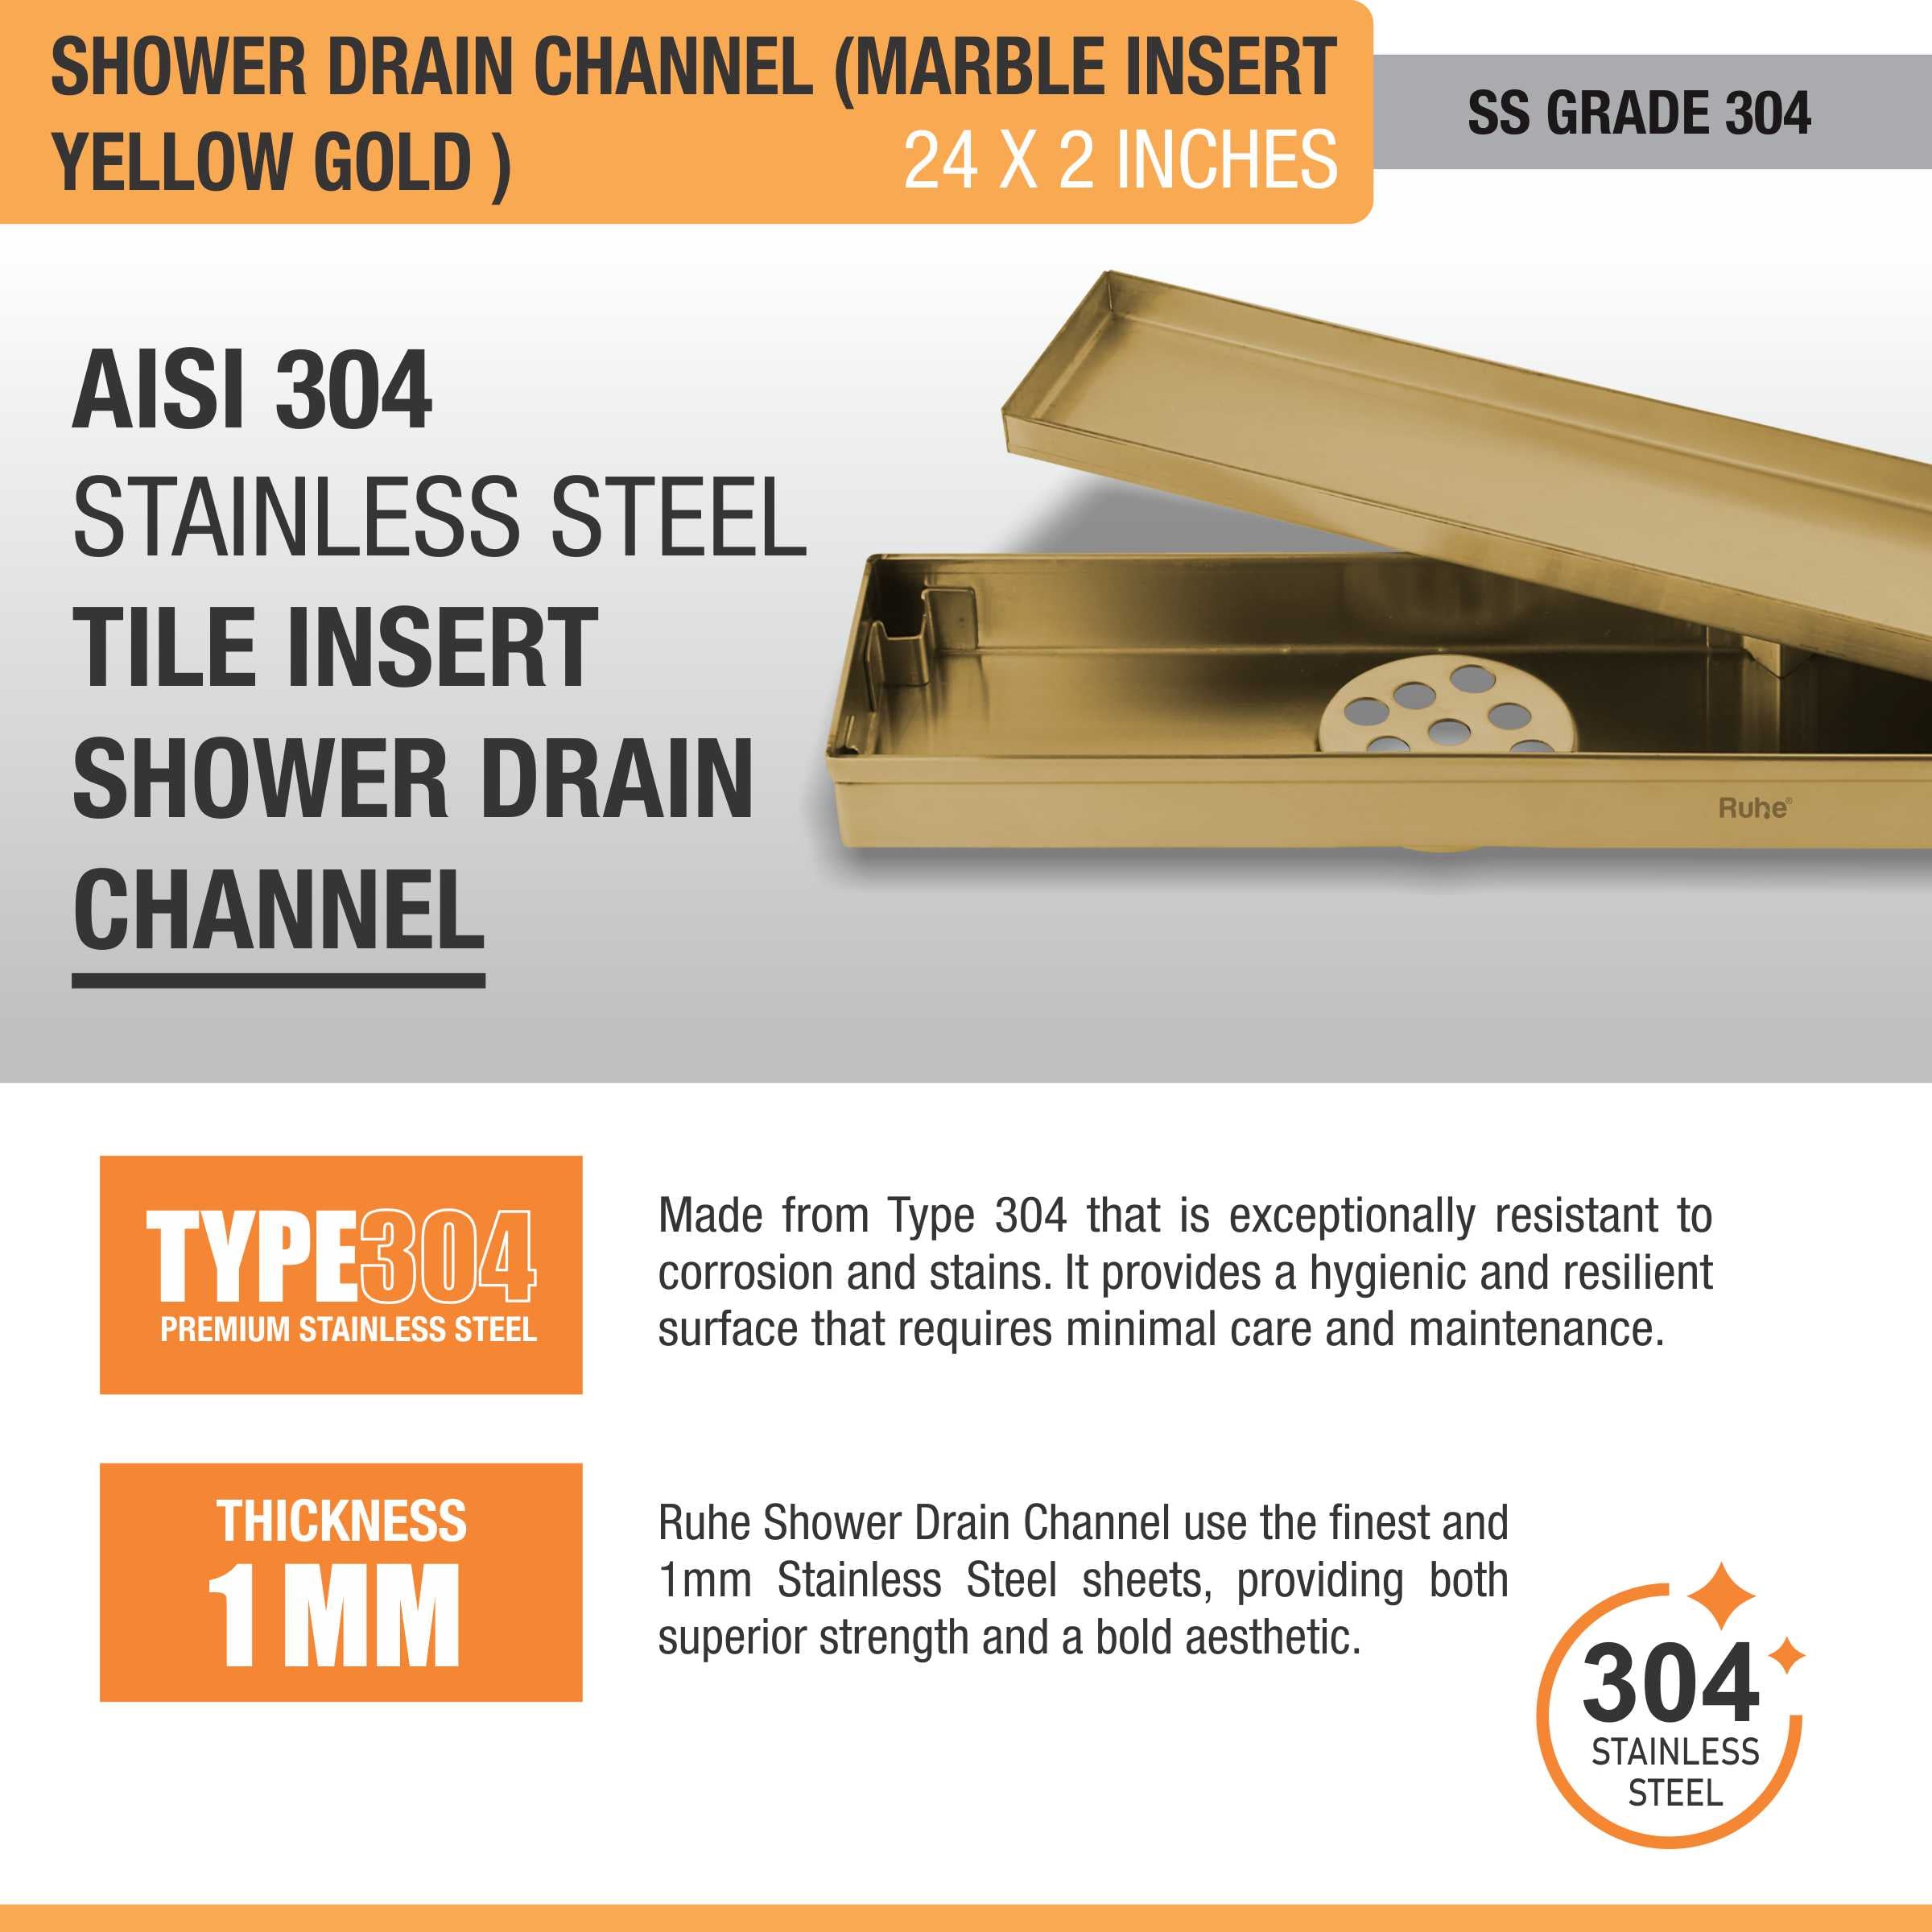 Marble Insert Shower Drain Channel (24 x 2 Inches) YELLOW GOLD stainless steel